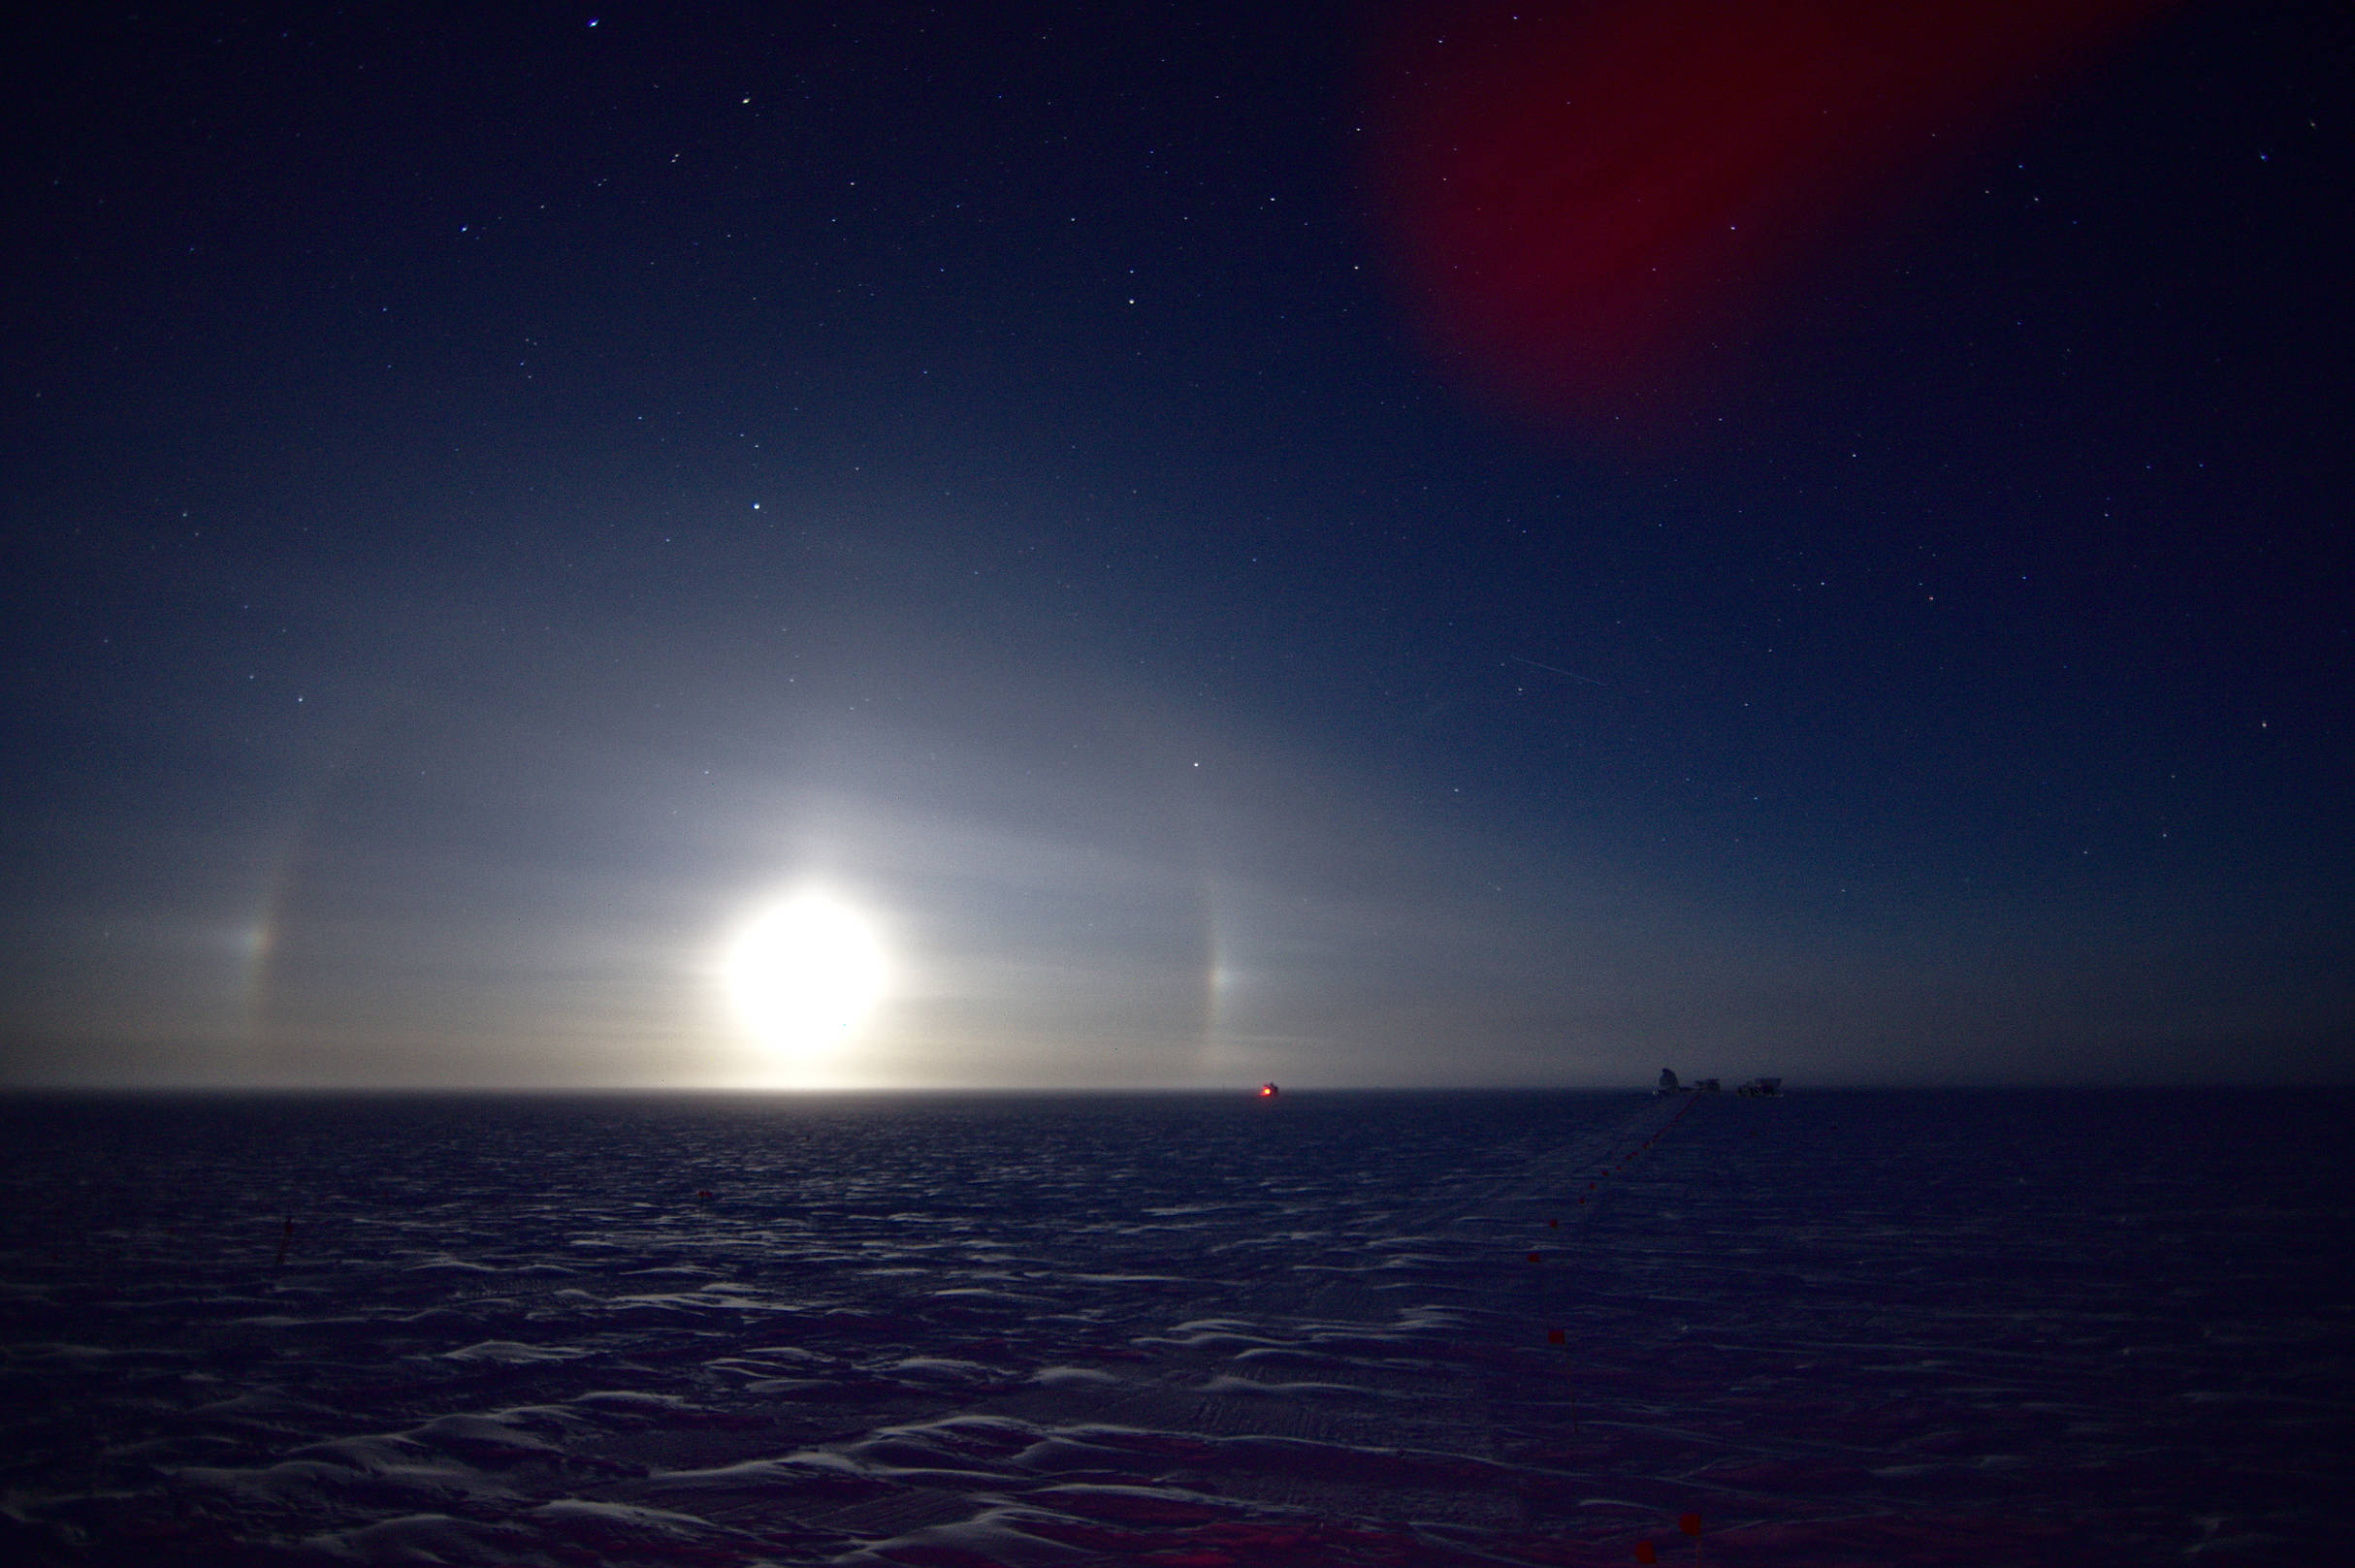 Ice crystals in the atmosphere cause the moonlight to form a partial halo and moon dogs around the full moon.